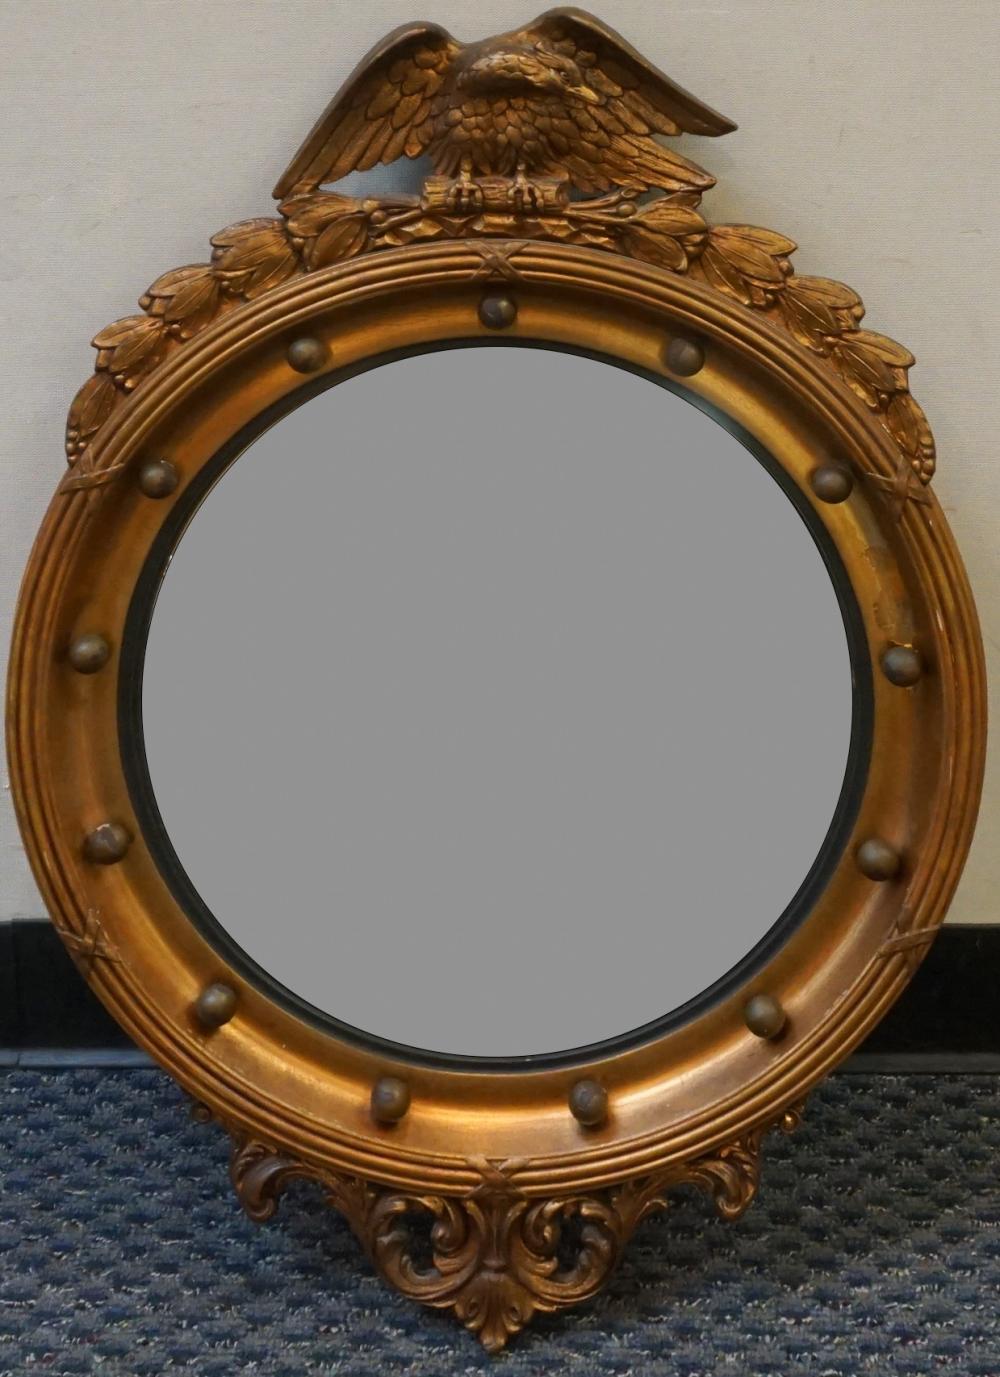 FEDERAL STYLE GILTWOOD MIRROR  32f4d6